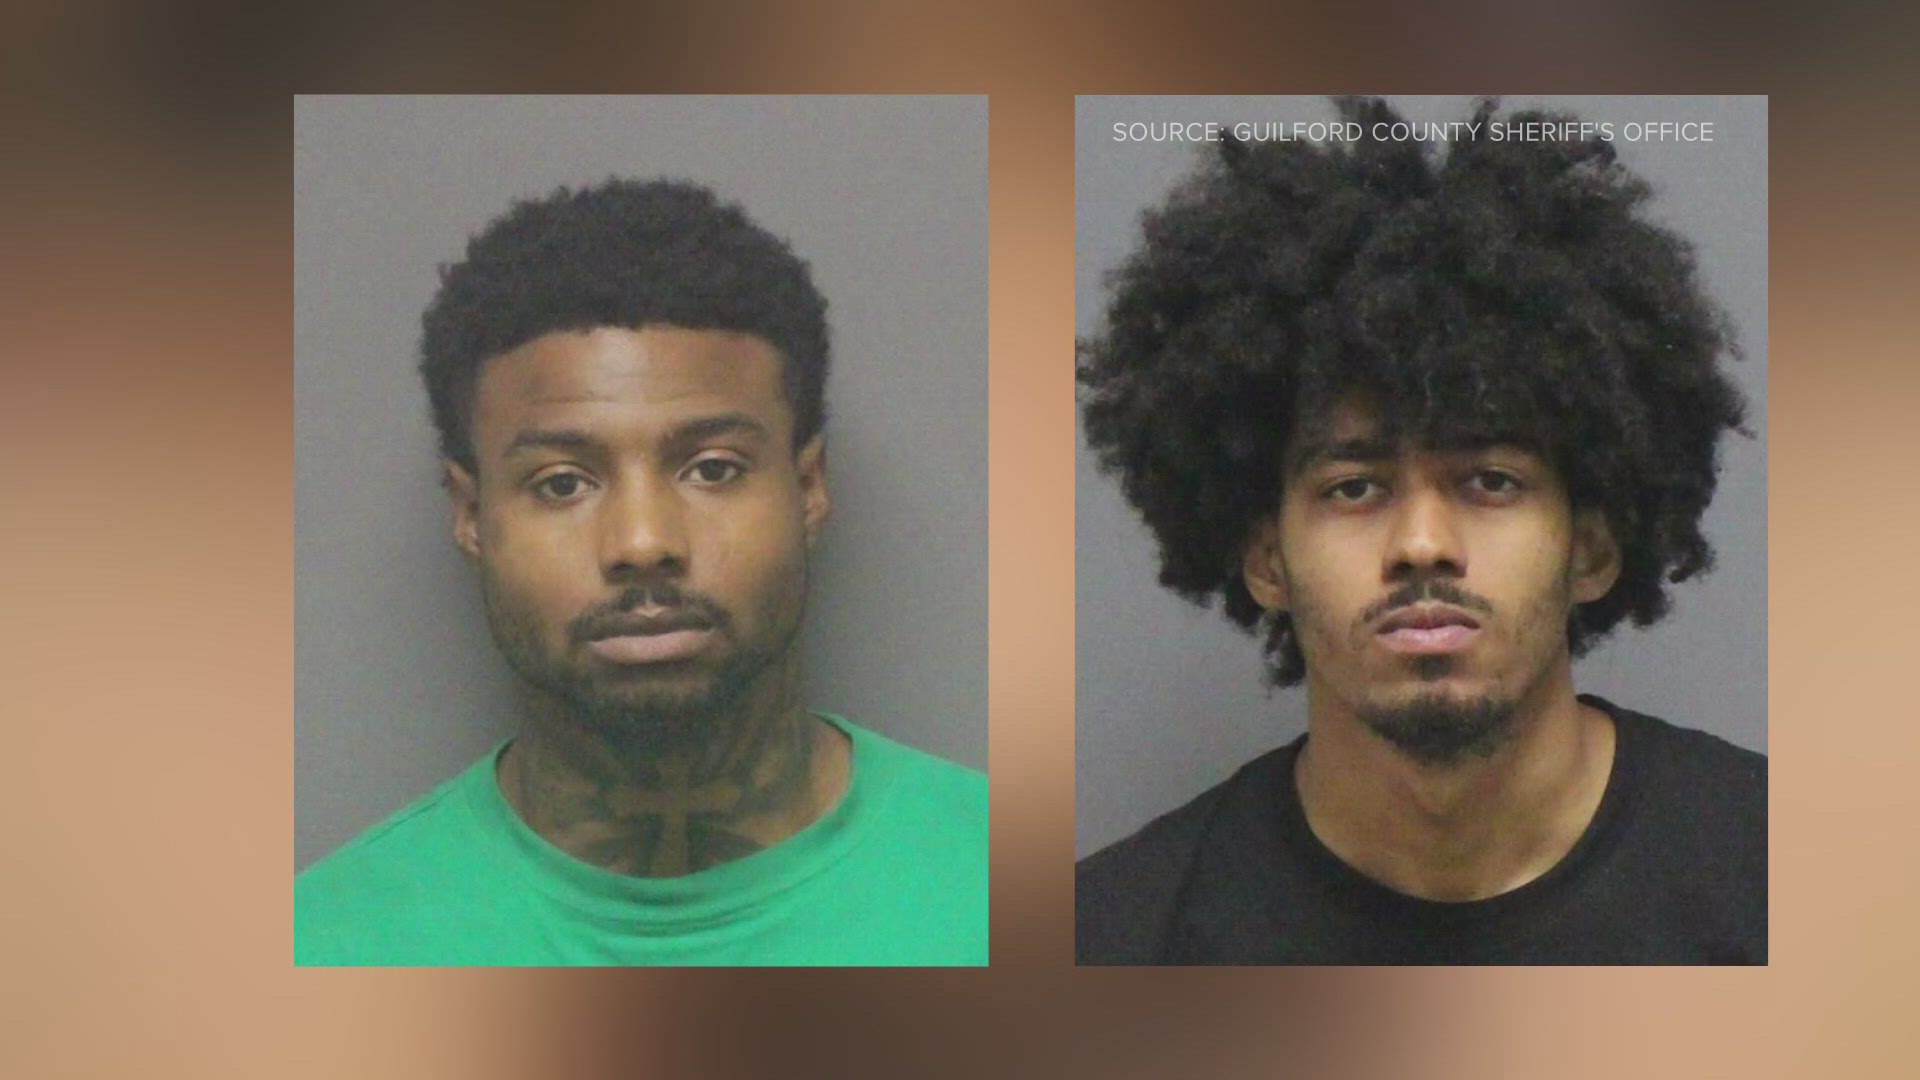 The two suspects were extradited back to Greensboro from Myrtle Beach.